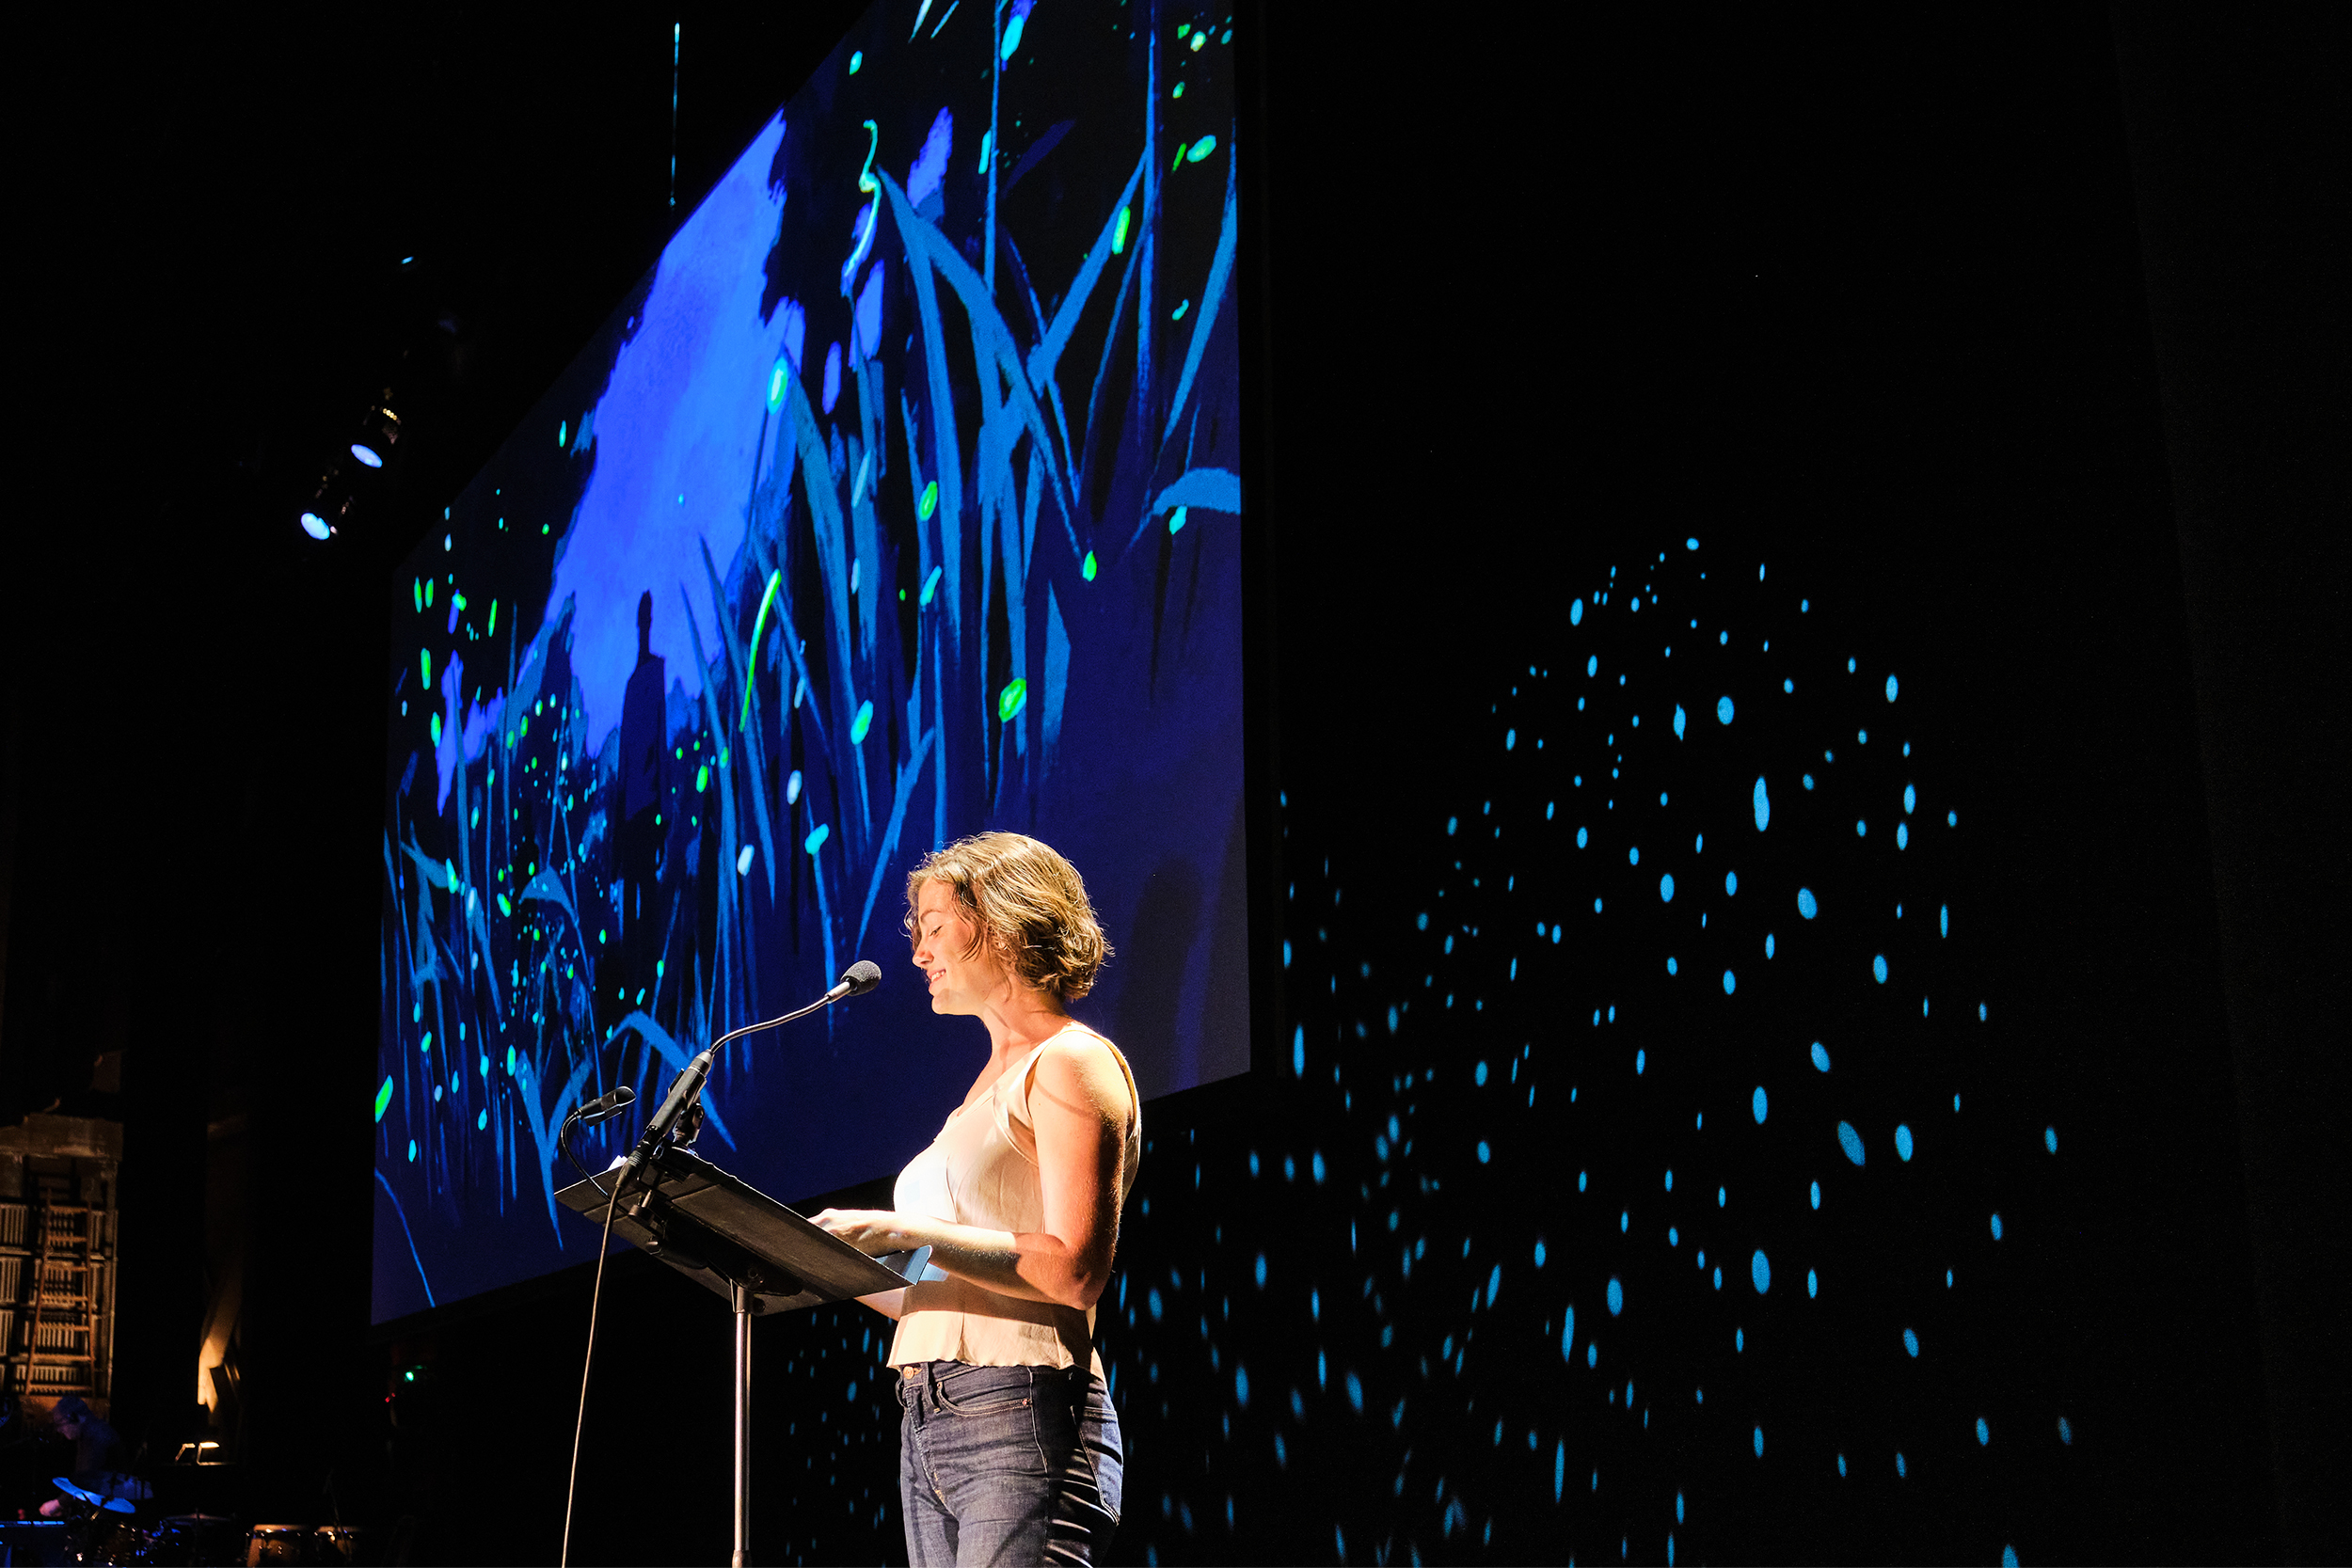 Brooke Jarvis performs on stage in front of a screen with artwork of fireflies.